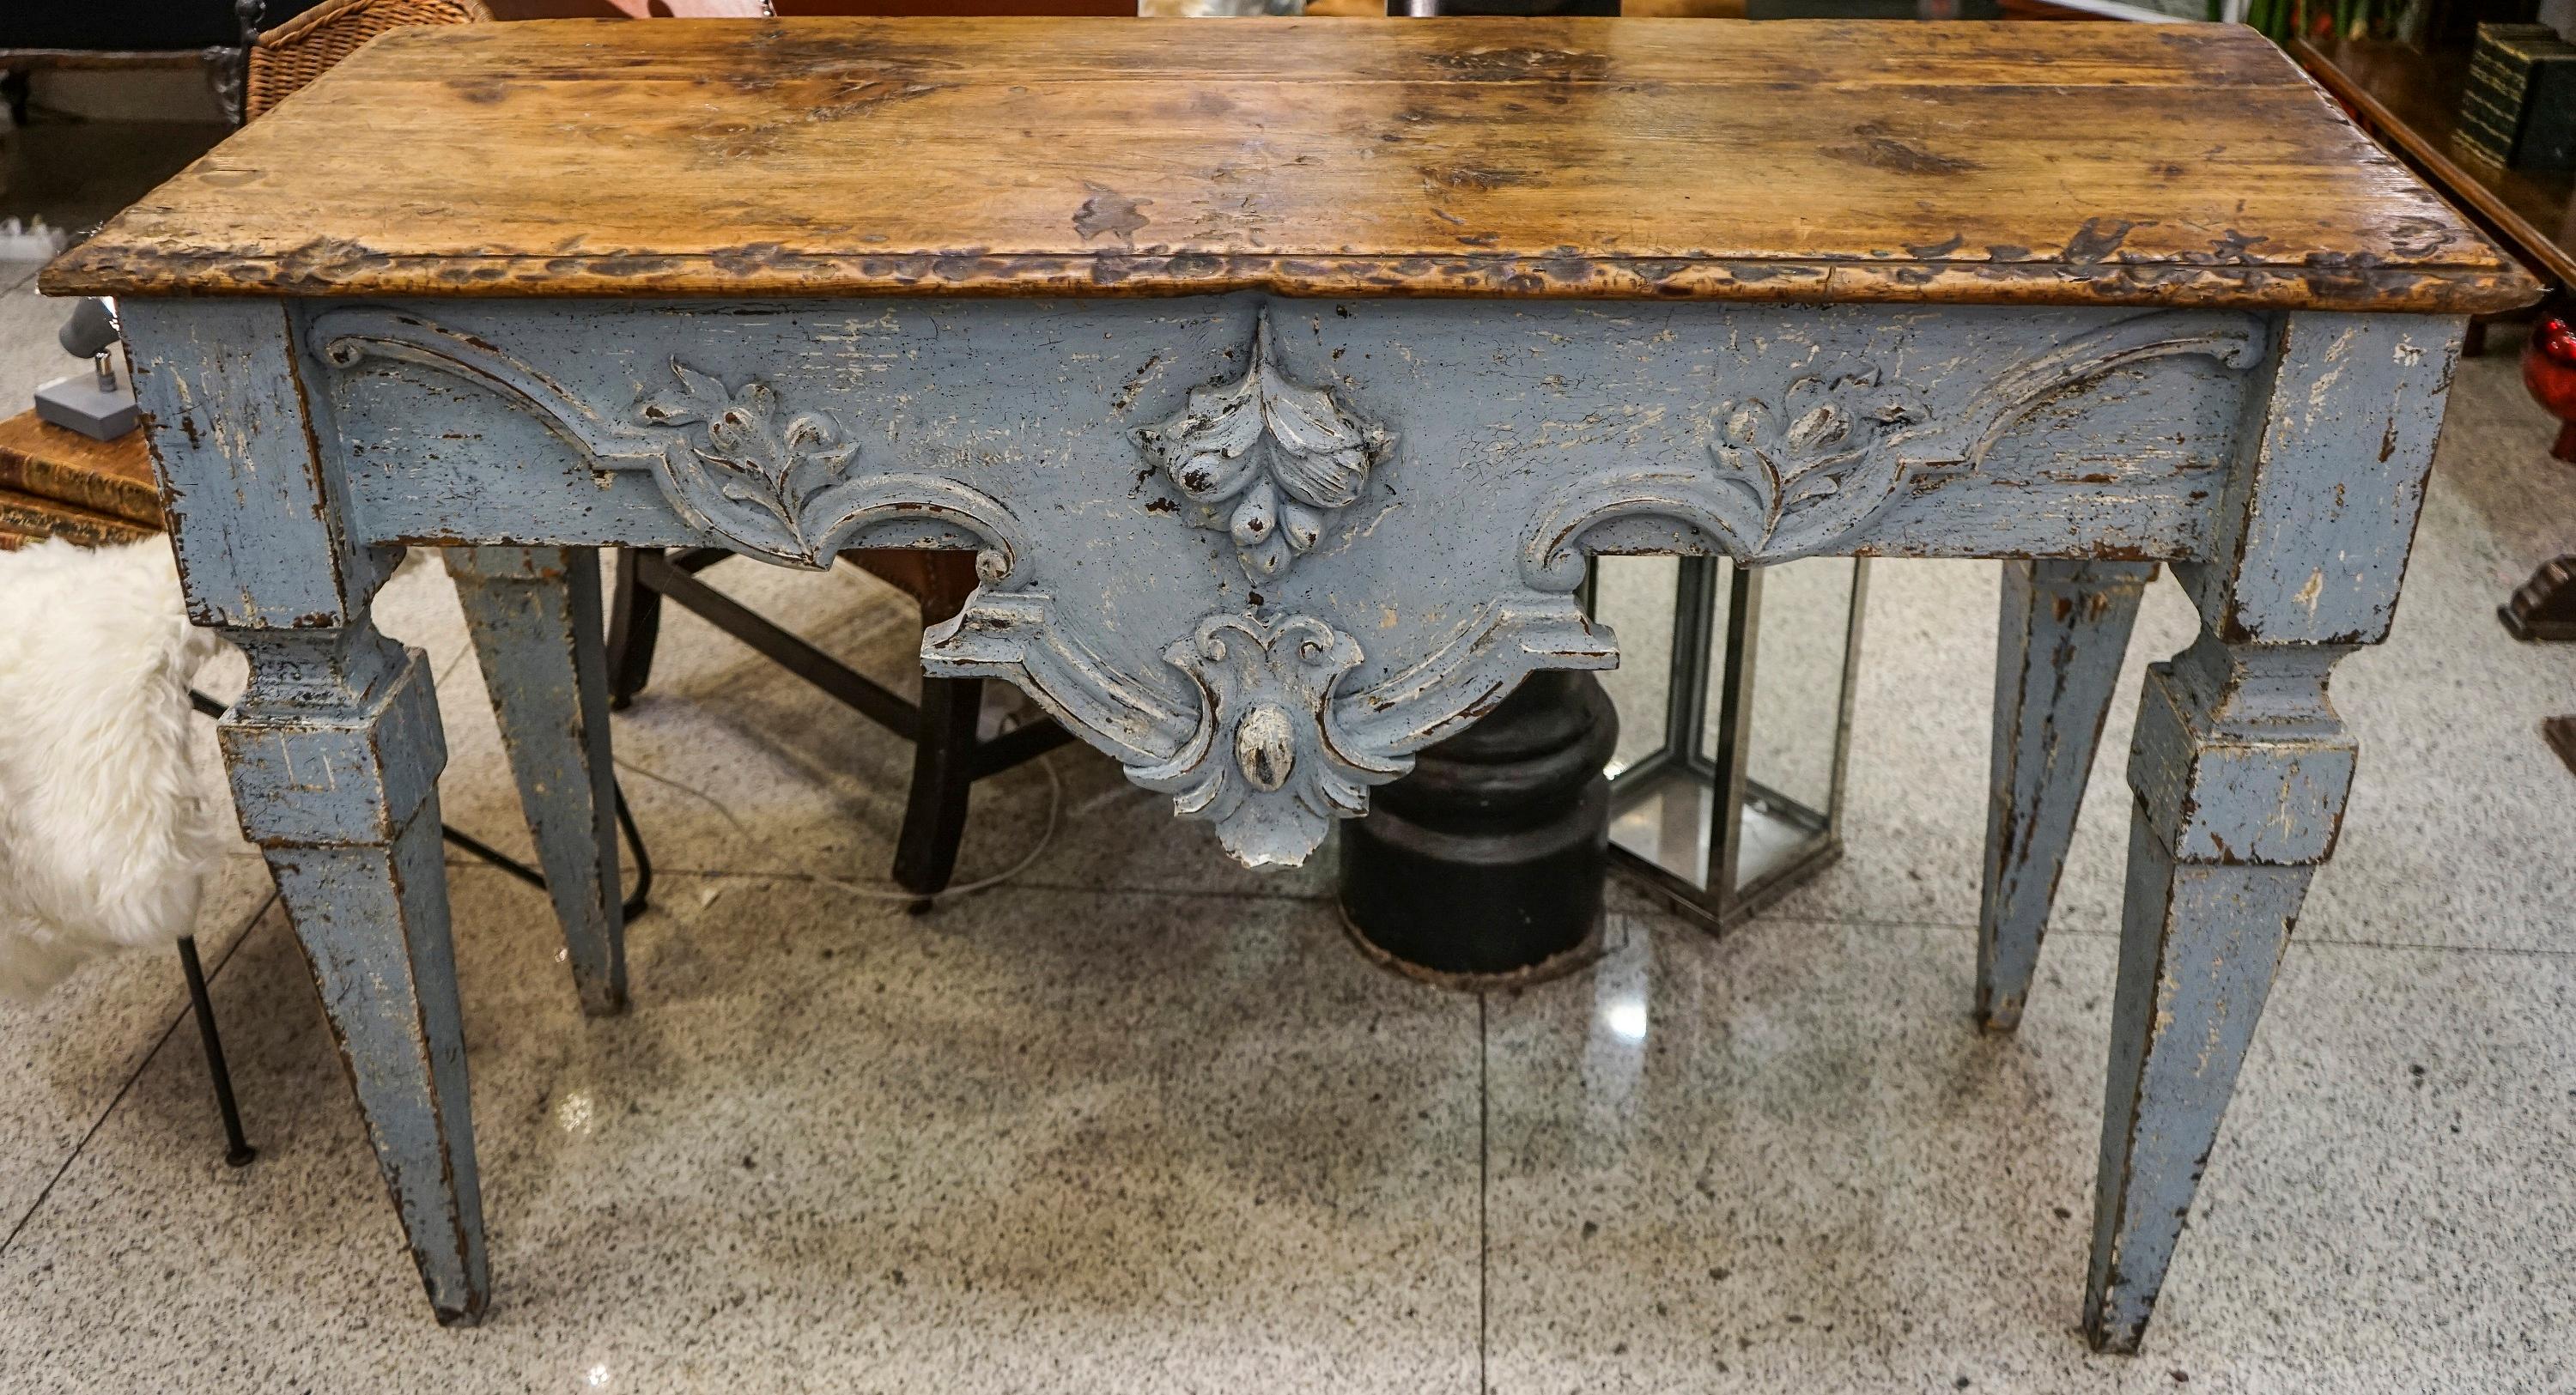 Hand-Painted 18th Century Luisxvi French Bluewood Handpainted and Carved Console Table, 1799